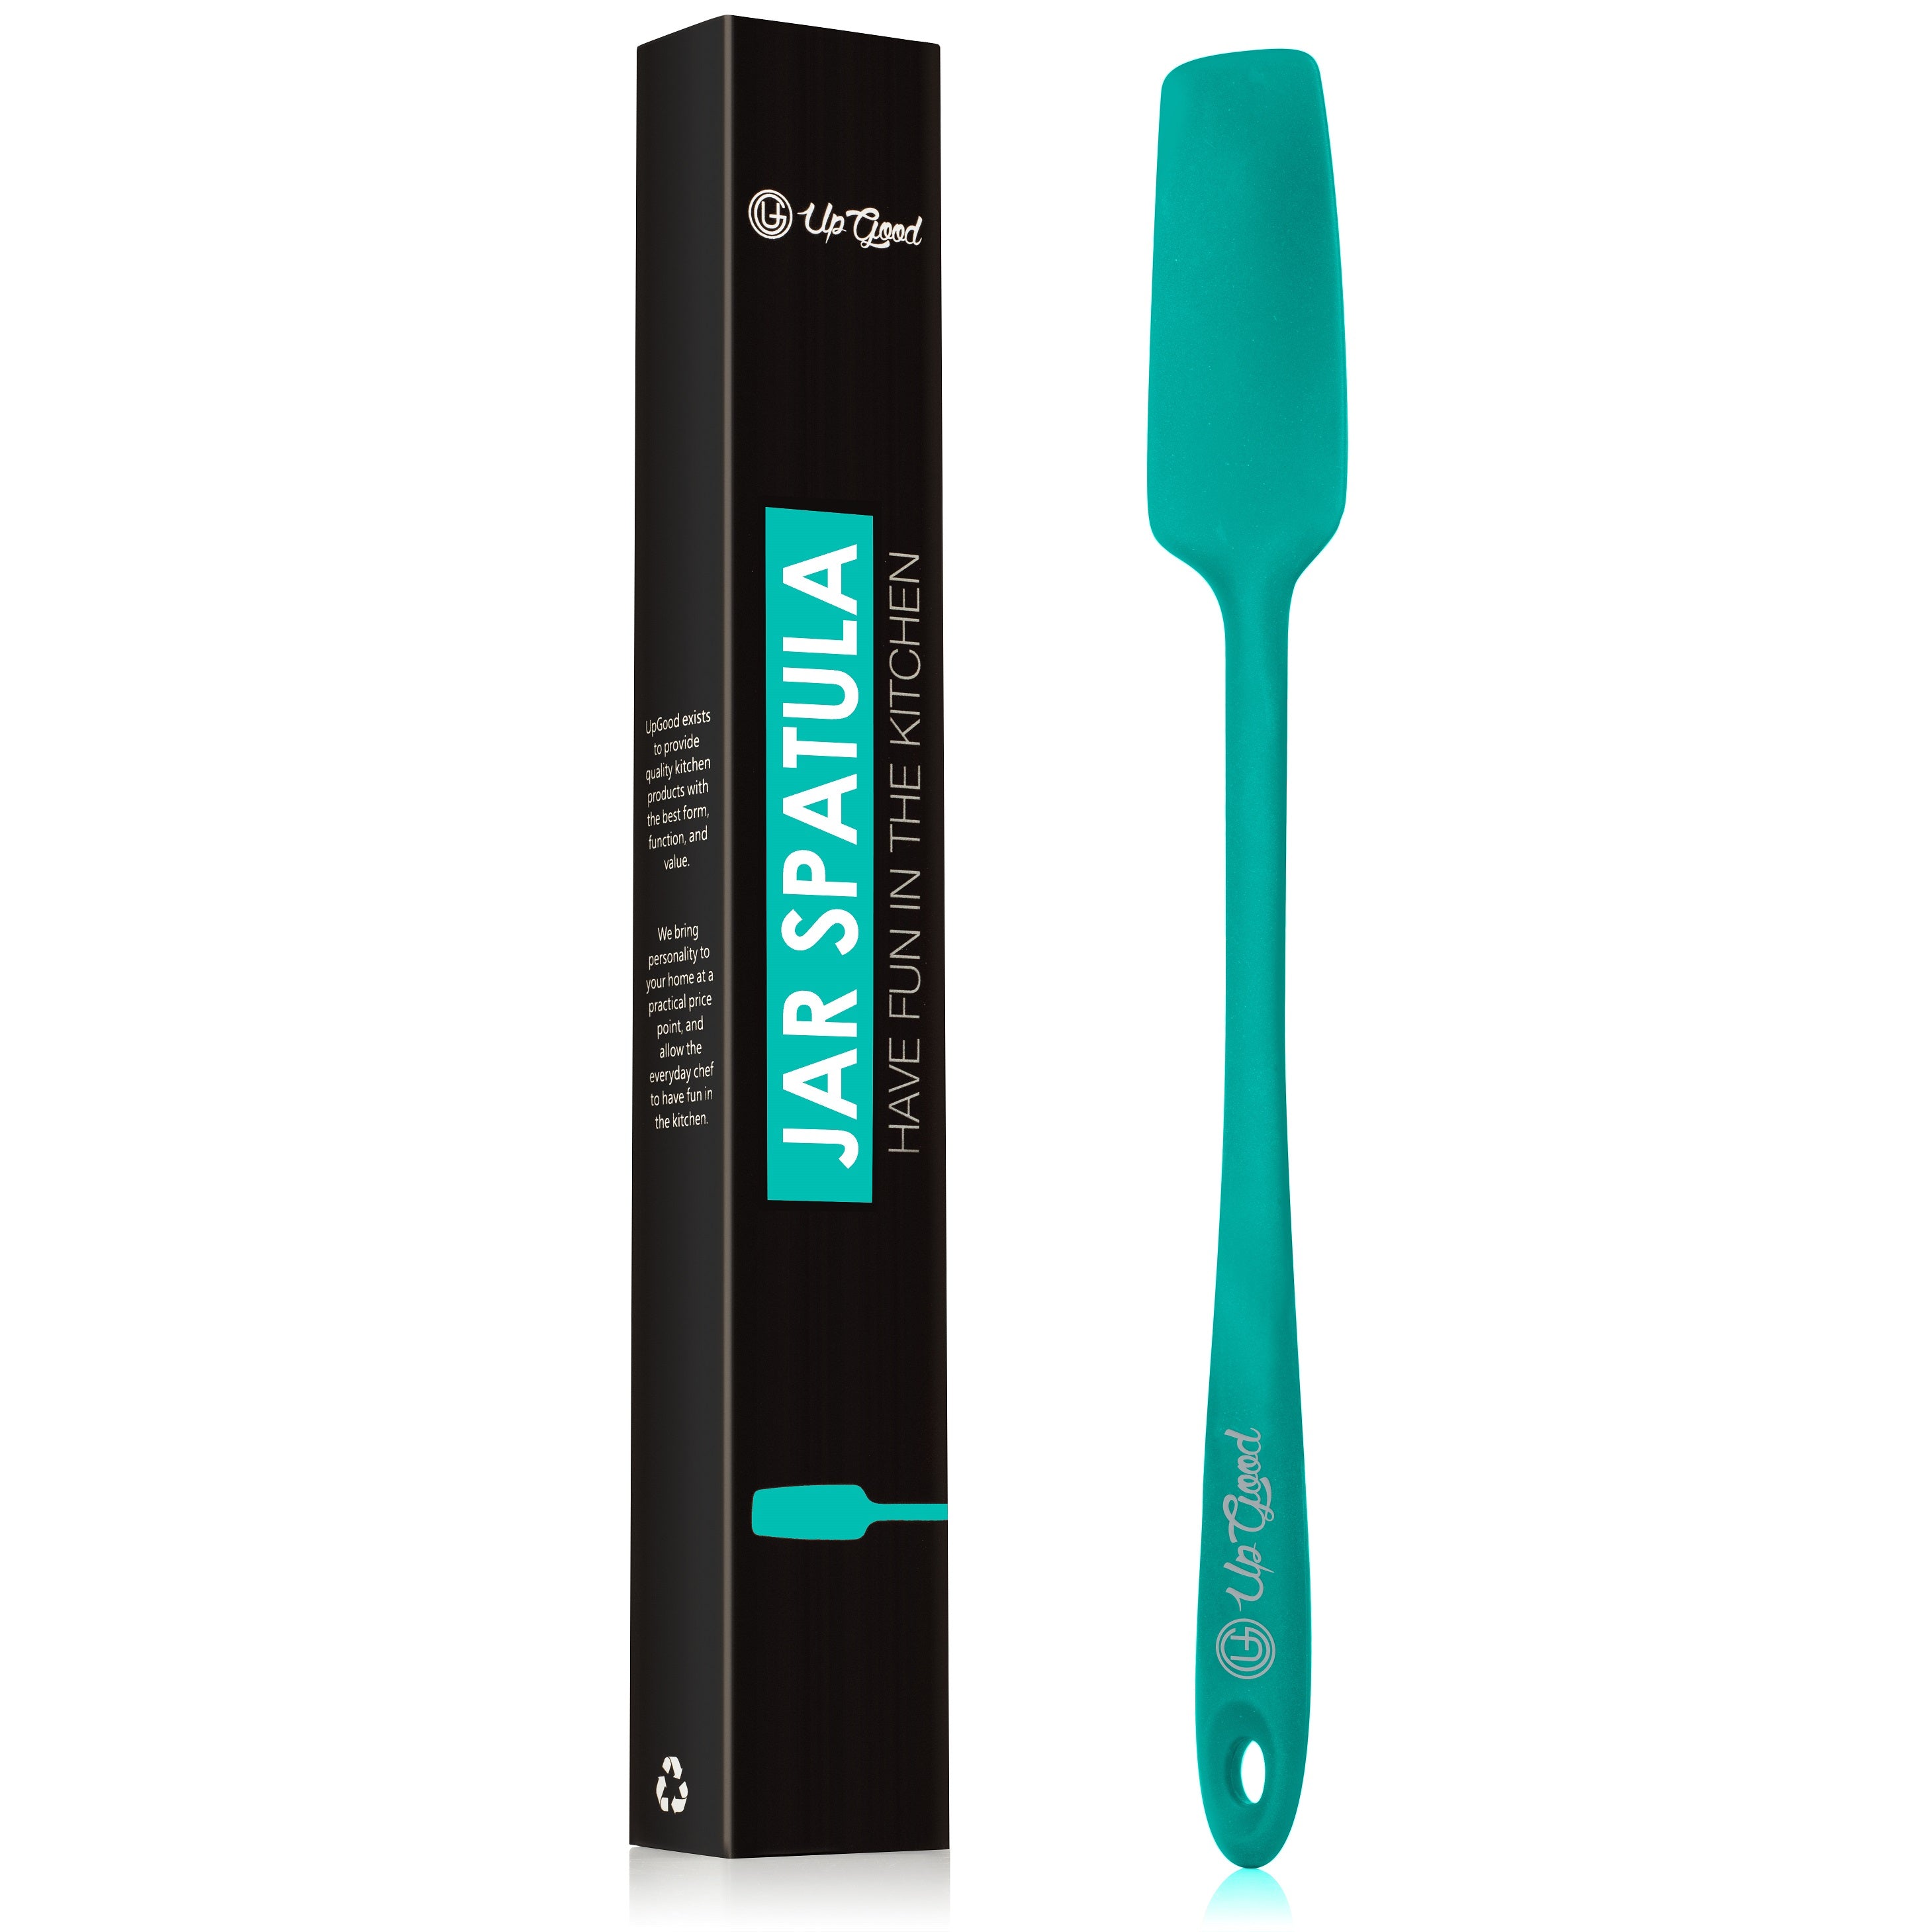 Jarby Silicone Slim Jar Spatula - Personalization Available